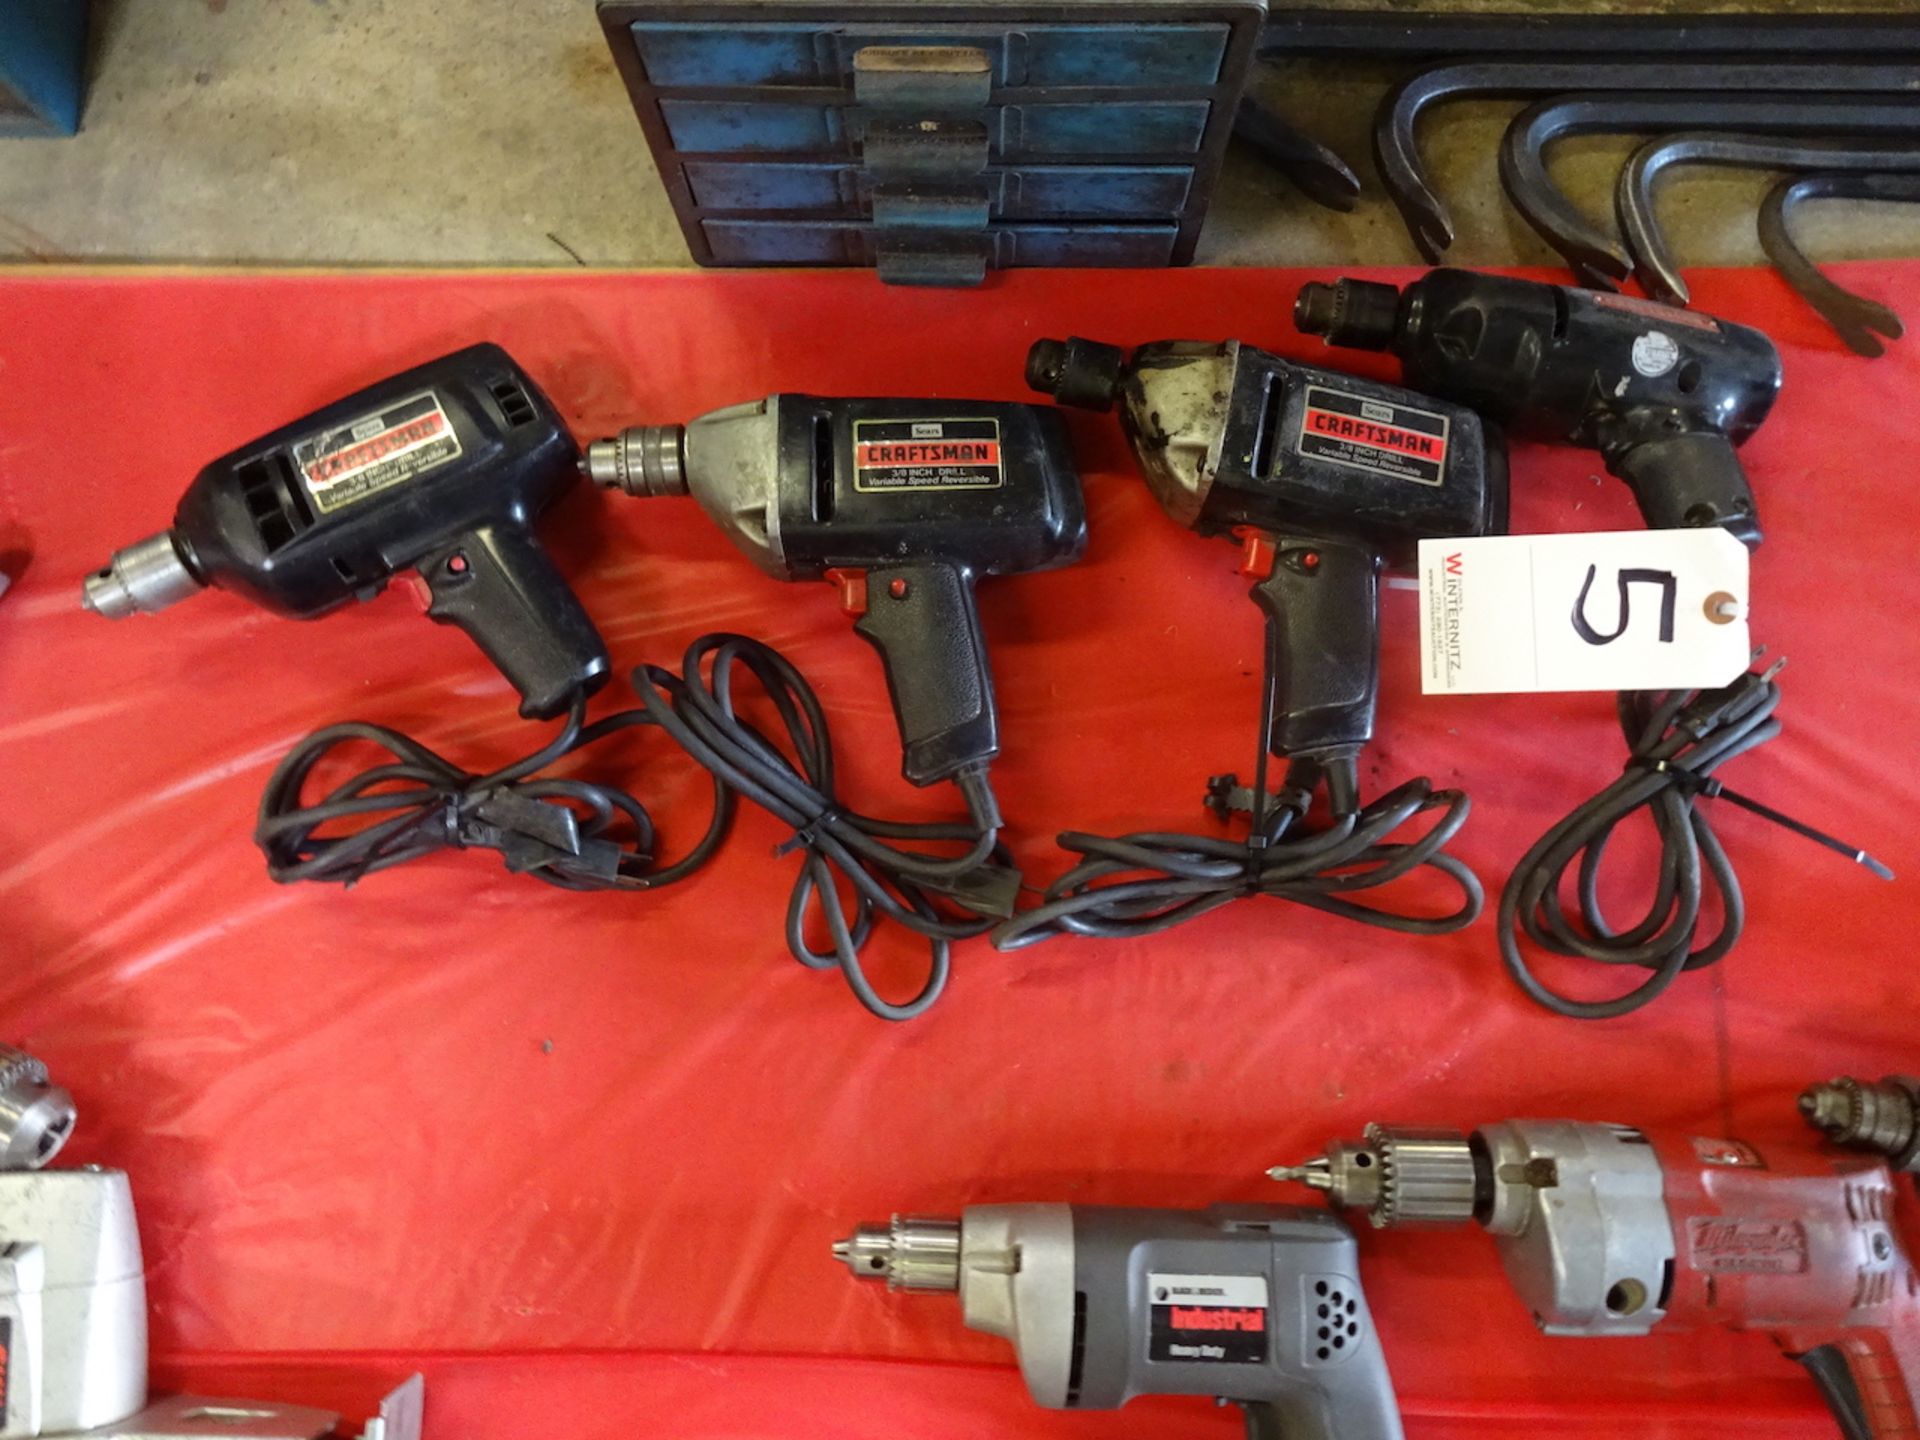 LOT: (4) Sears Craftsman 3/8 in. Electric Drills